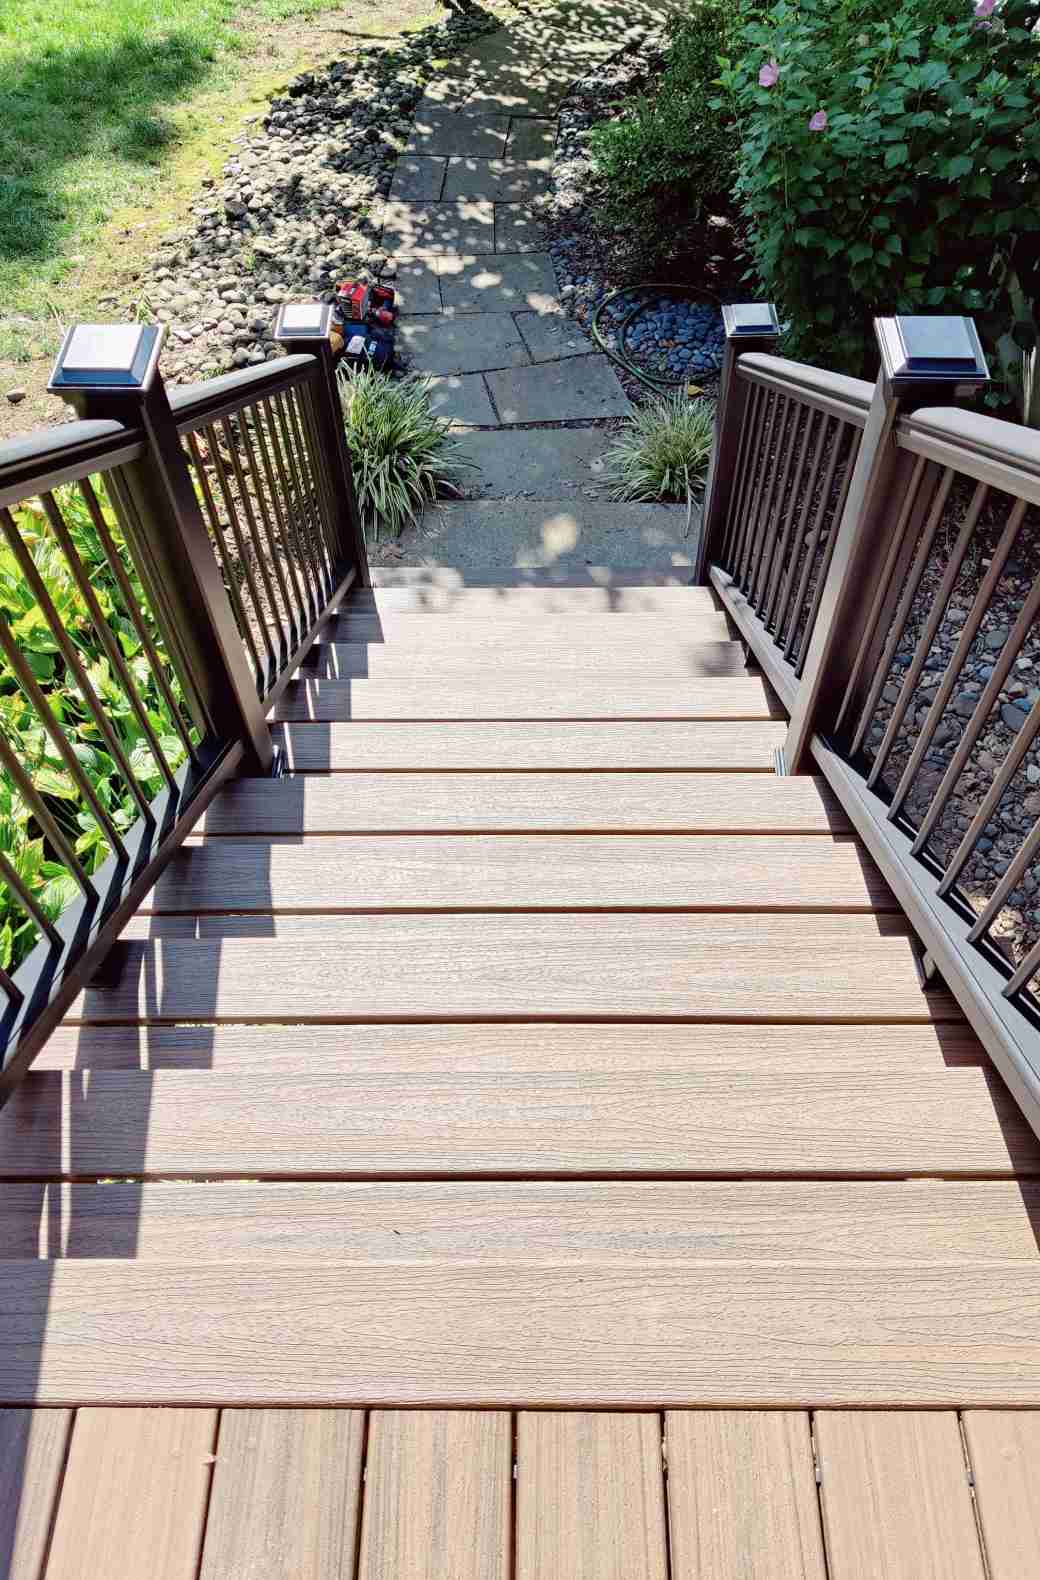 Artfully crafted deck stairs by True Built Construction with richly stained wooden planks leading down to a charming garden path. The railings are adorned with high-quality, black aluminum balusters.